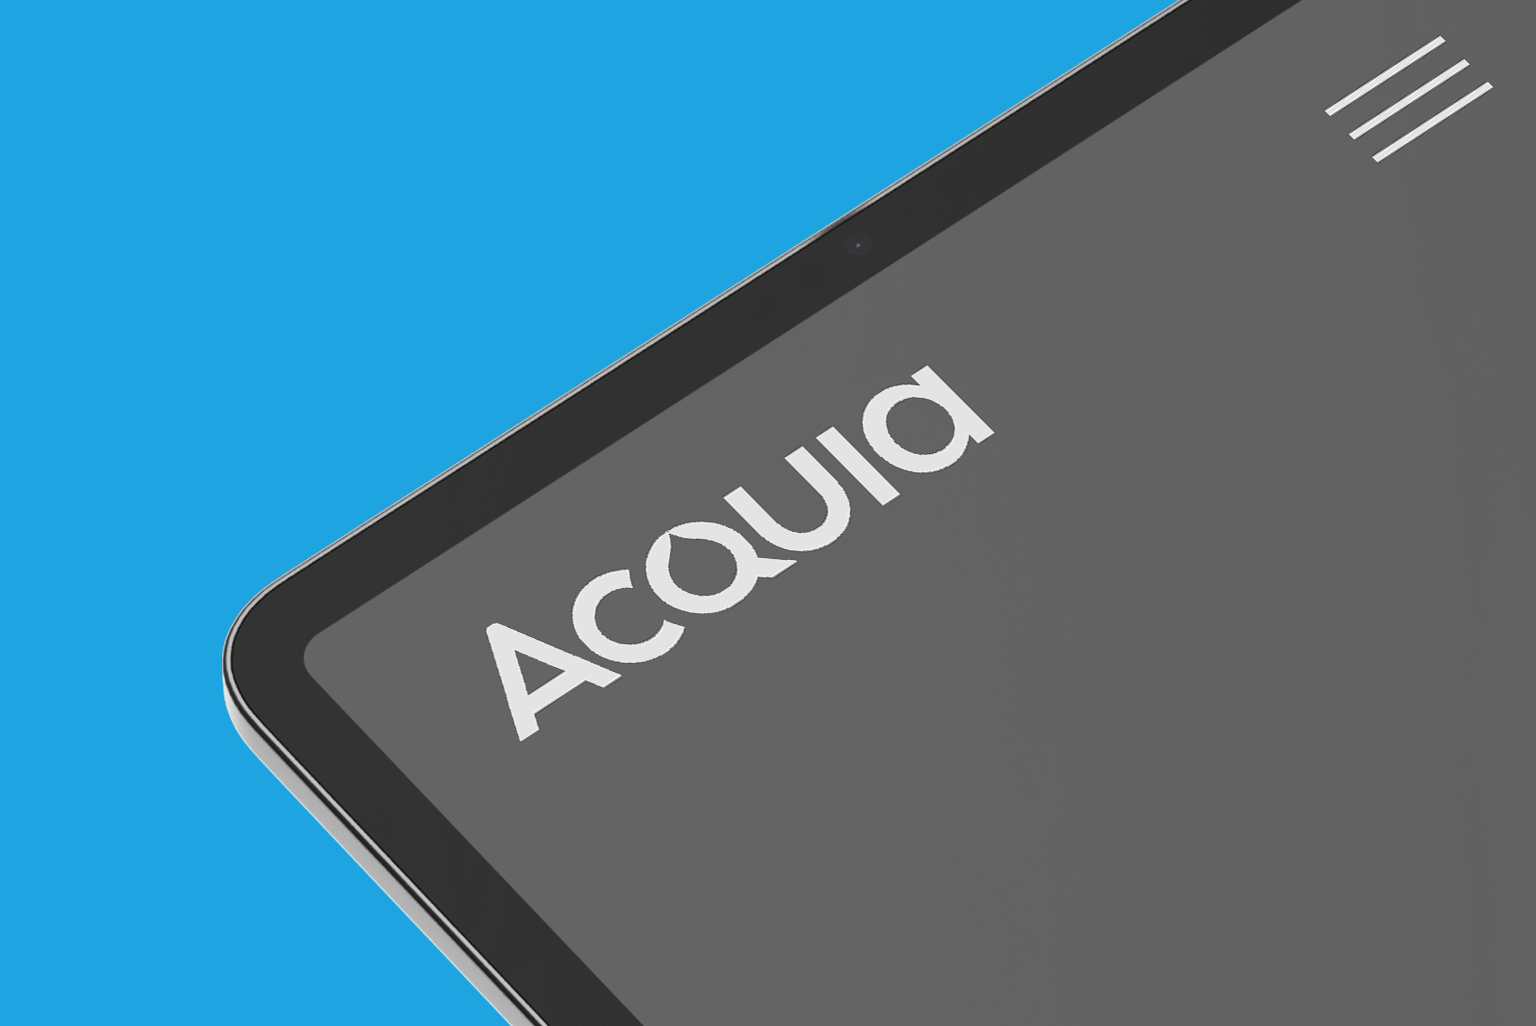 Part of tablet with acquia logo.